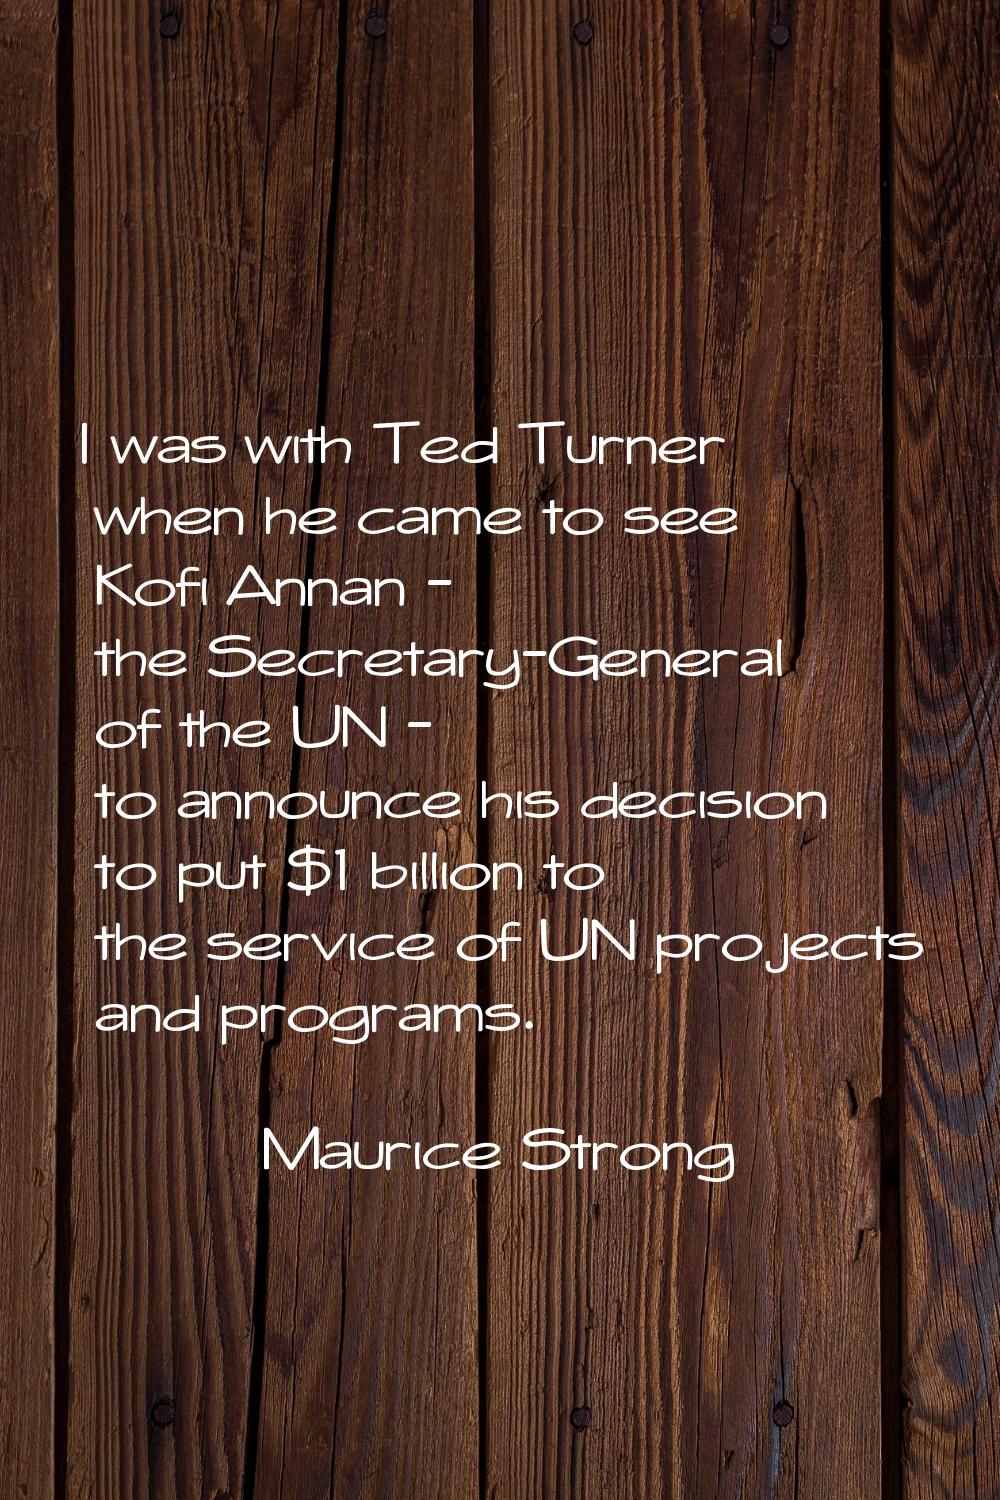 I was with Ted Turner when he came to see Kofi Annan - the Secretary-General of the UN - to announc